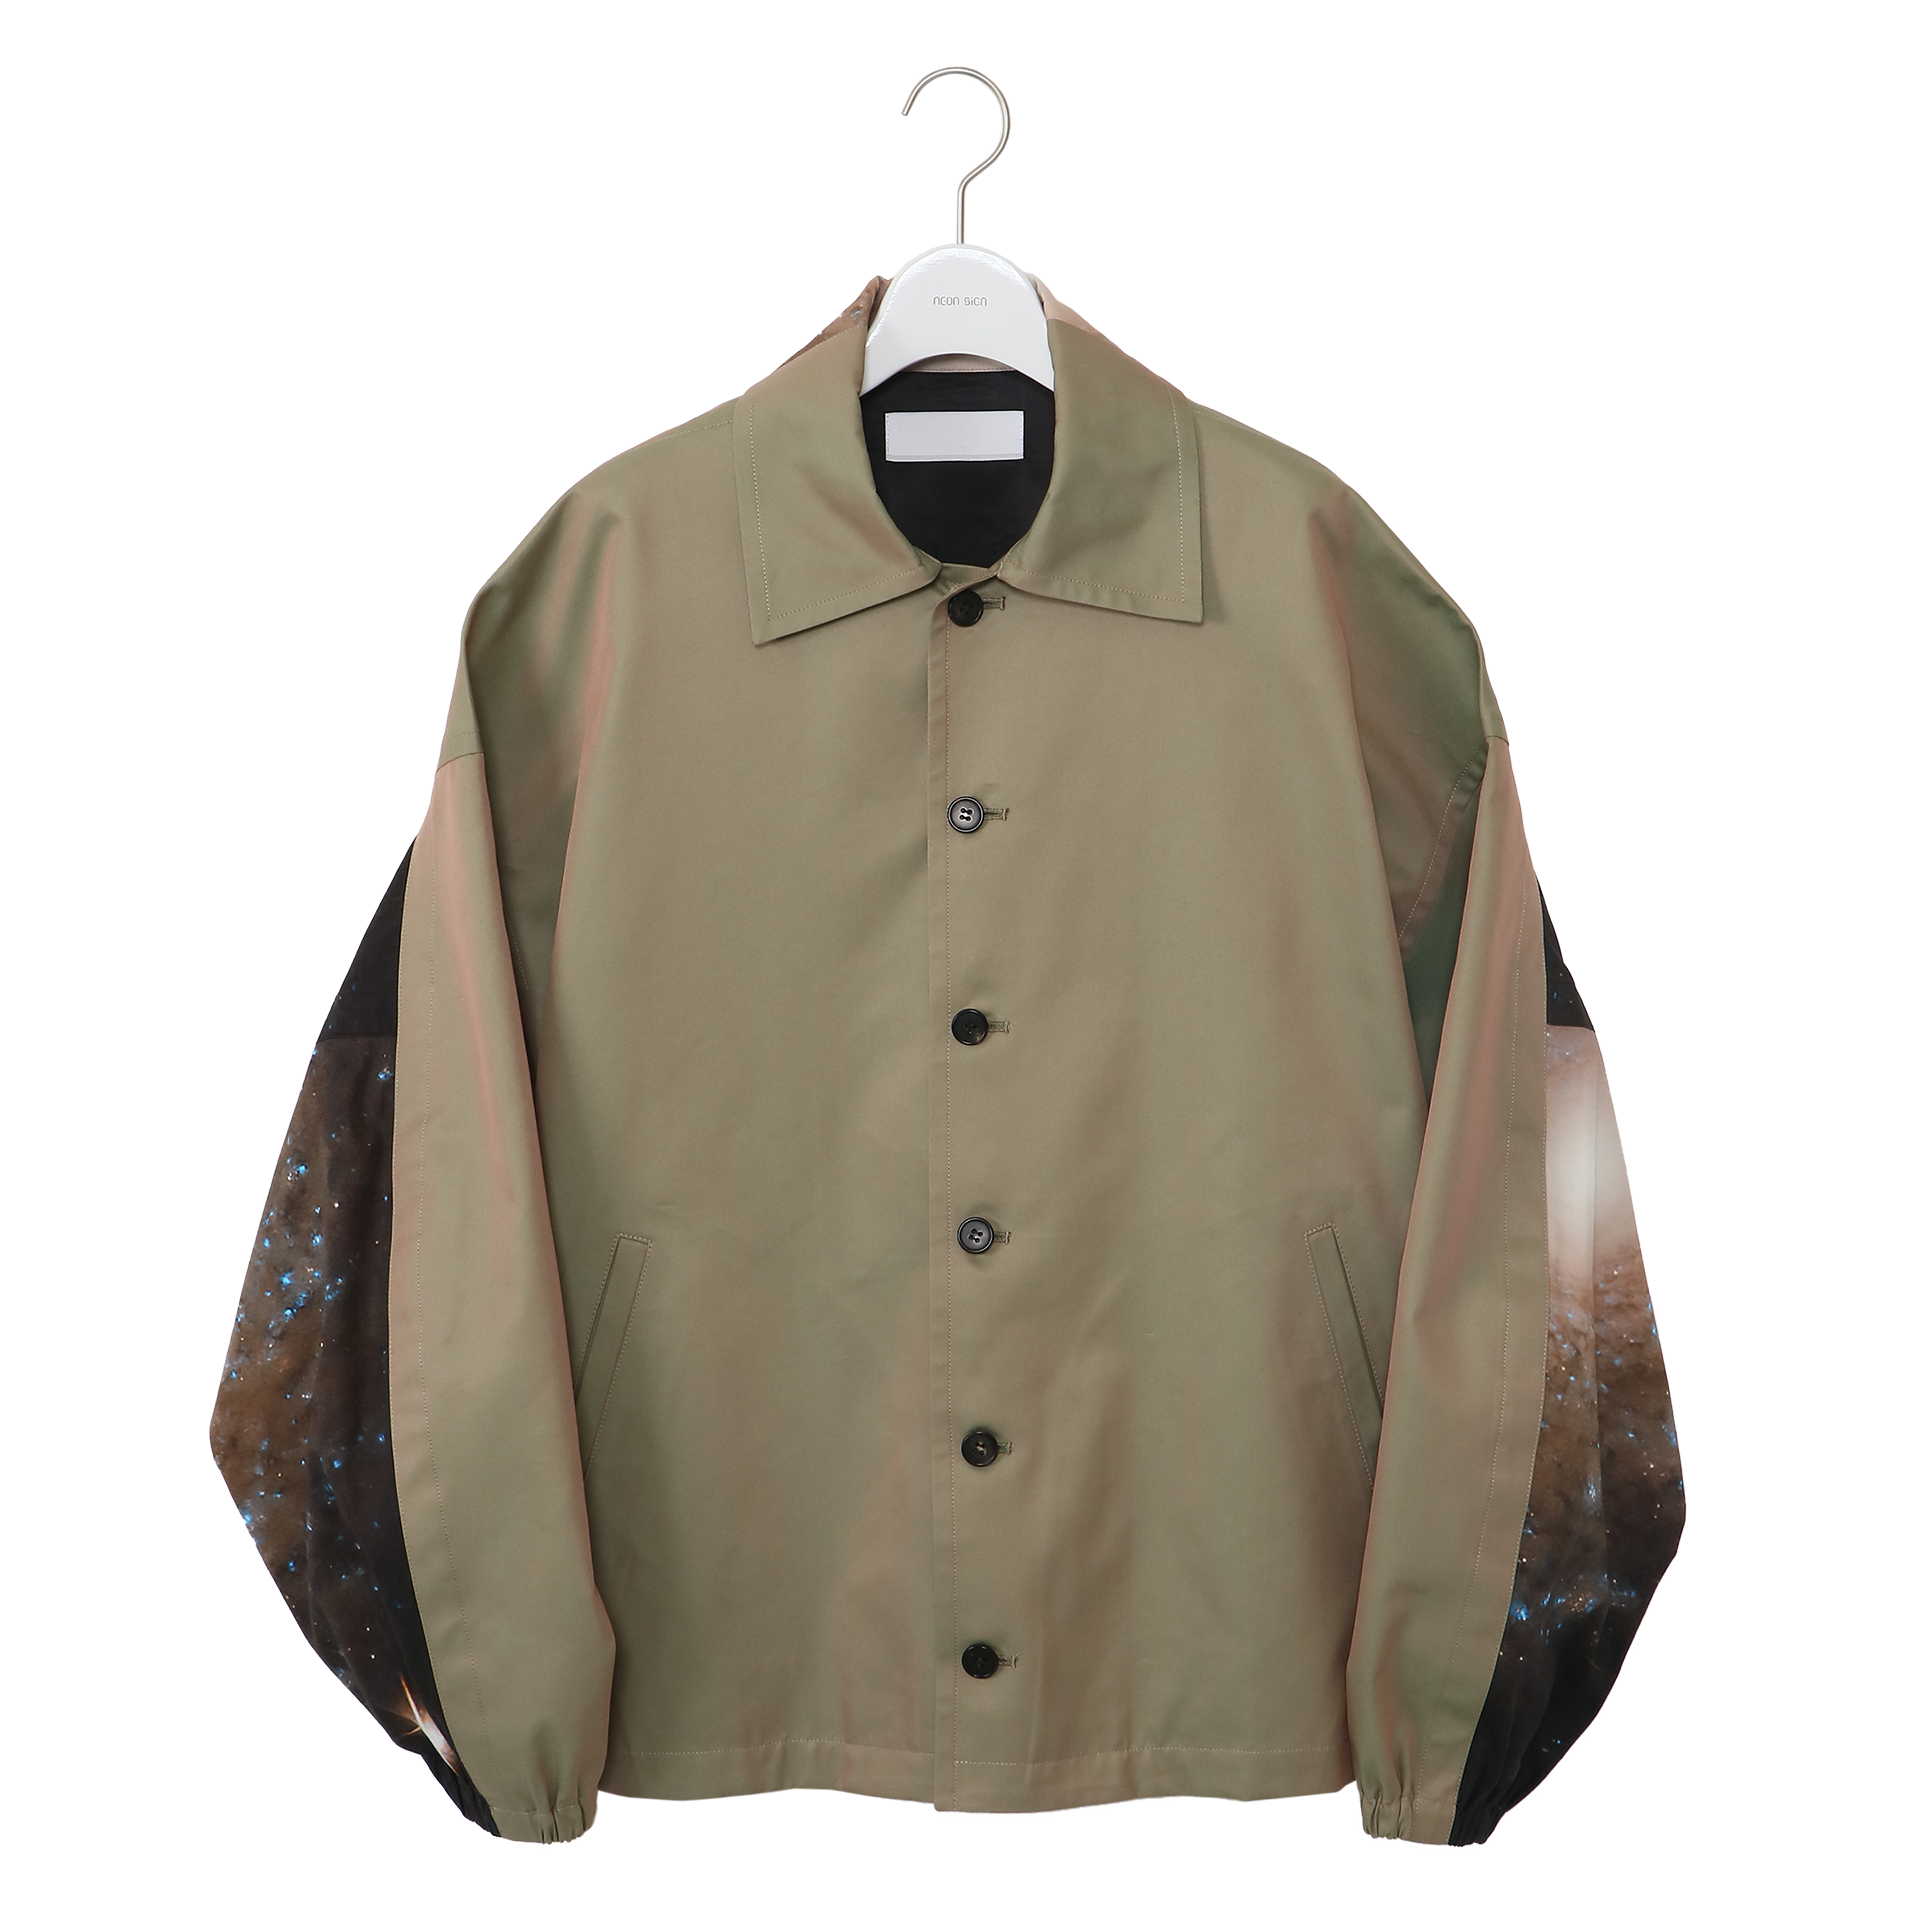 NEON SIGN COSMO BARRED SPACE JACKET OLIVE/BLACK